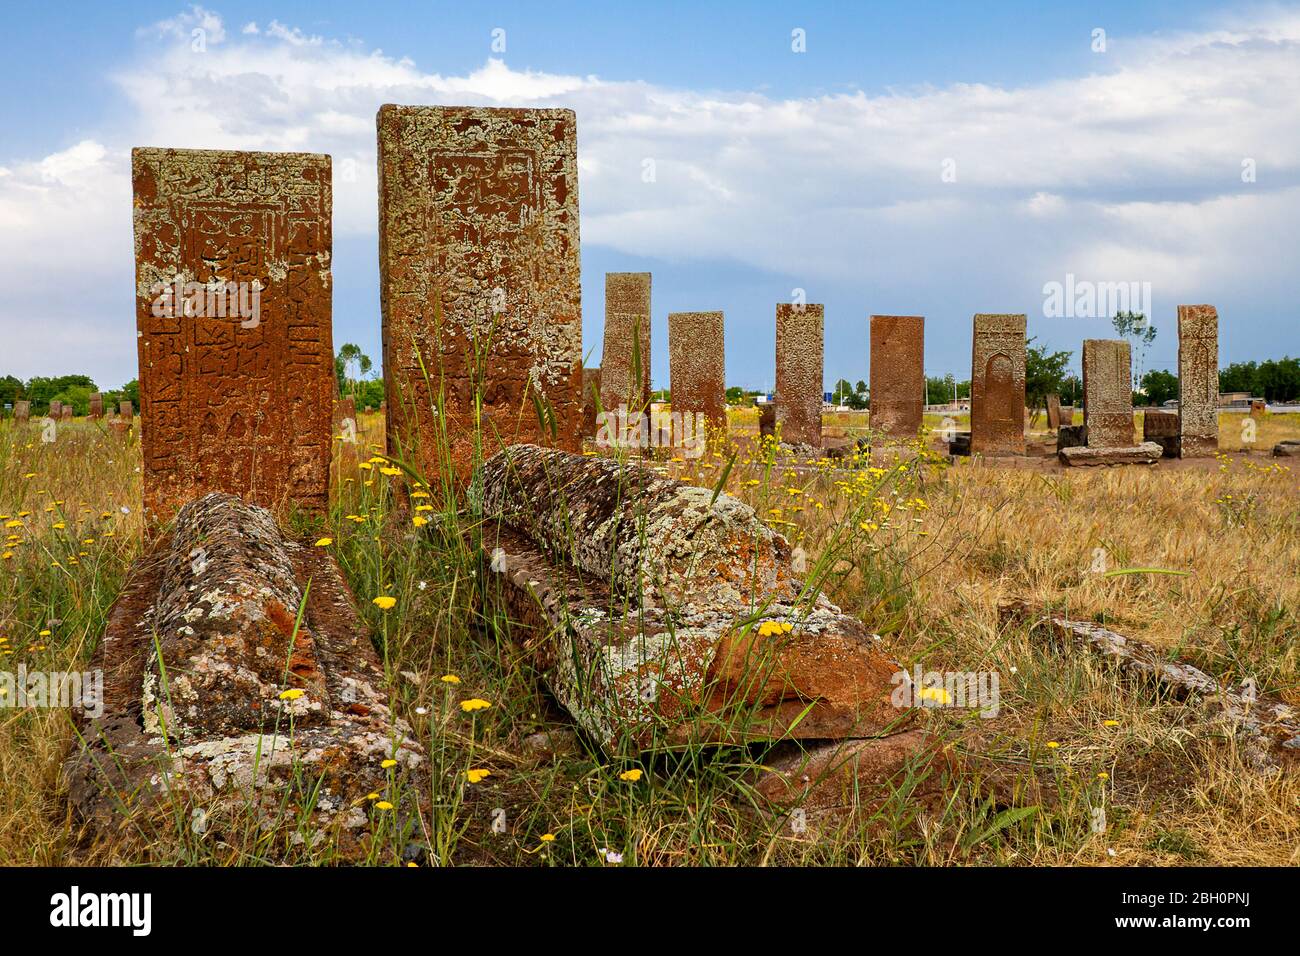 Ancient tombstones in the historical cemetery of Selcuk Turks from 12th century, in the town of Ahlat, Turkey Stock Photo